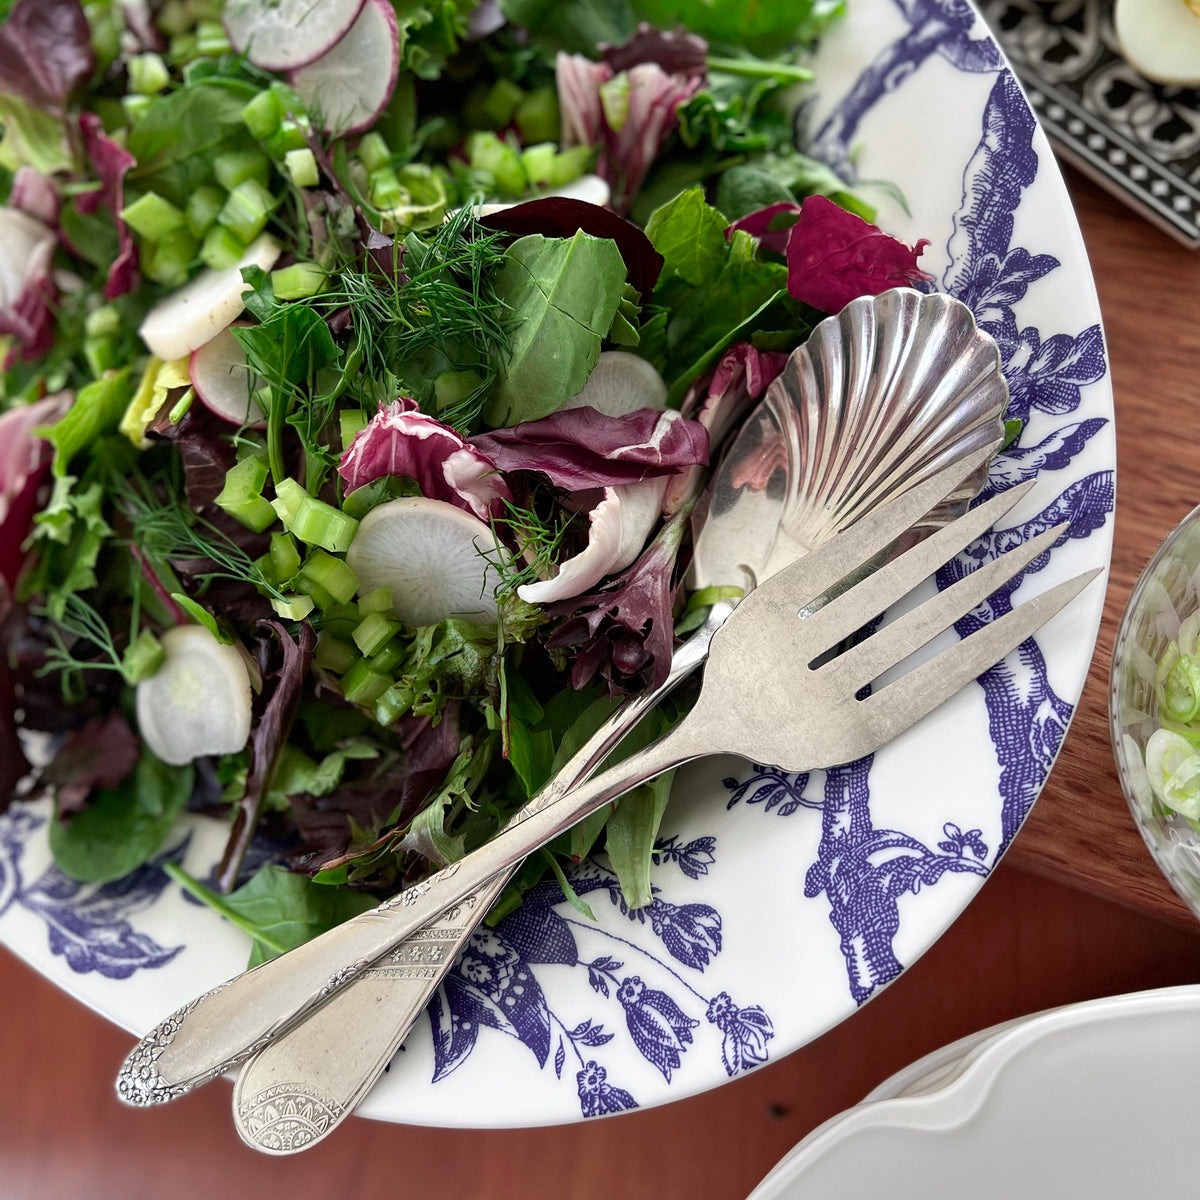 A crisp tossed salad is featured on a blue and white porcelain Arcadia Platter by Caskata.